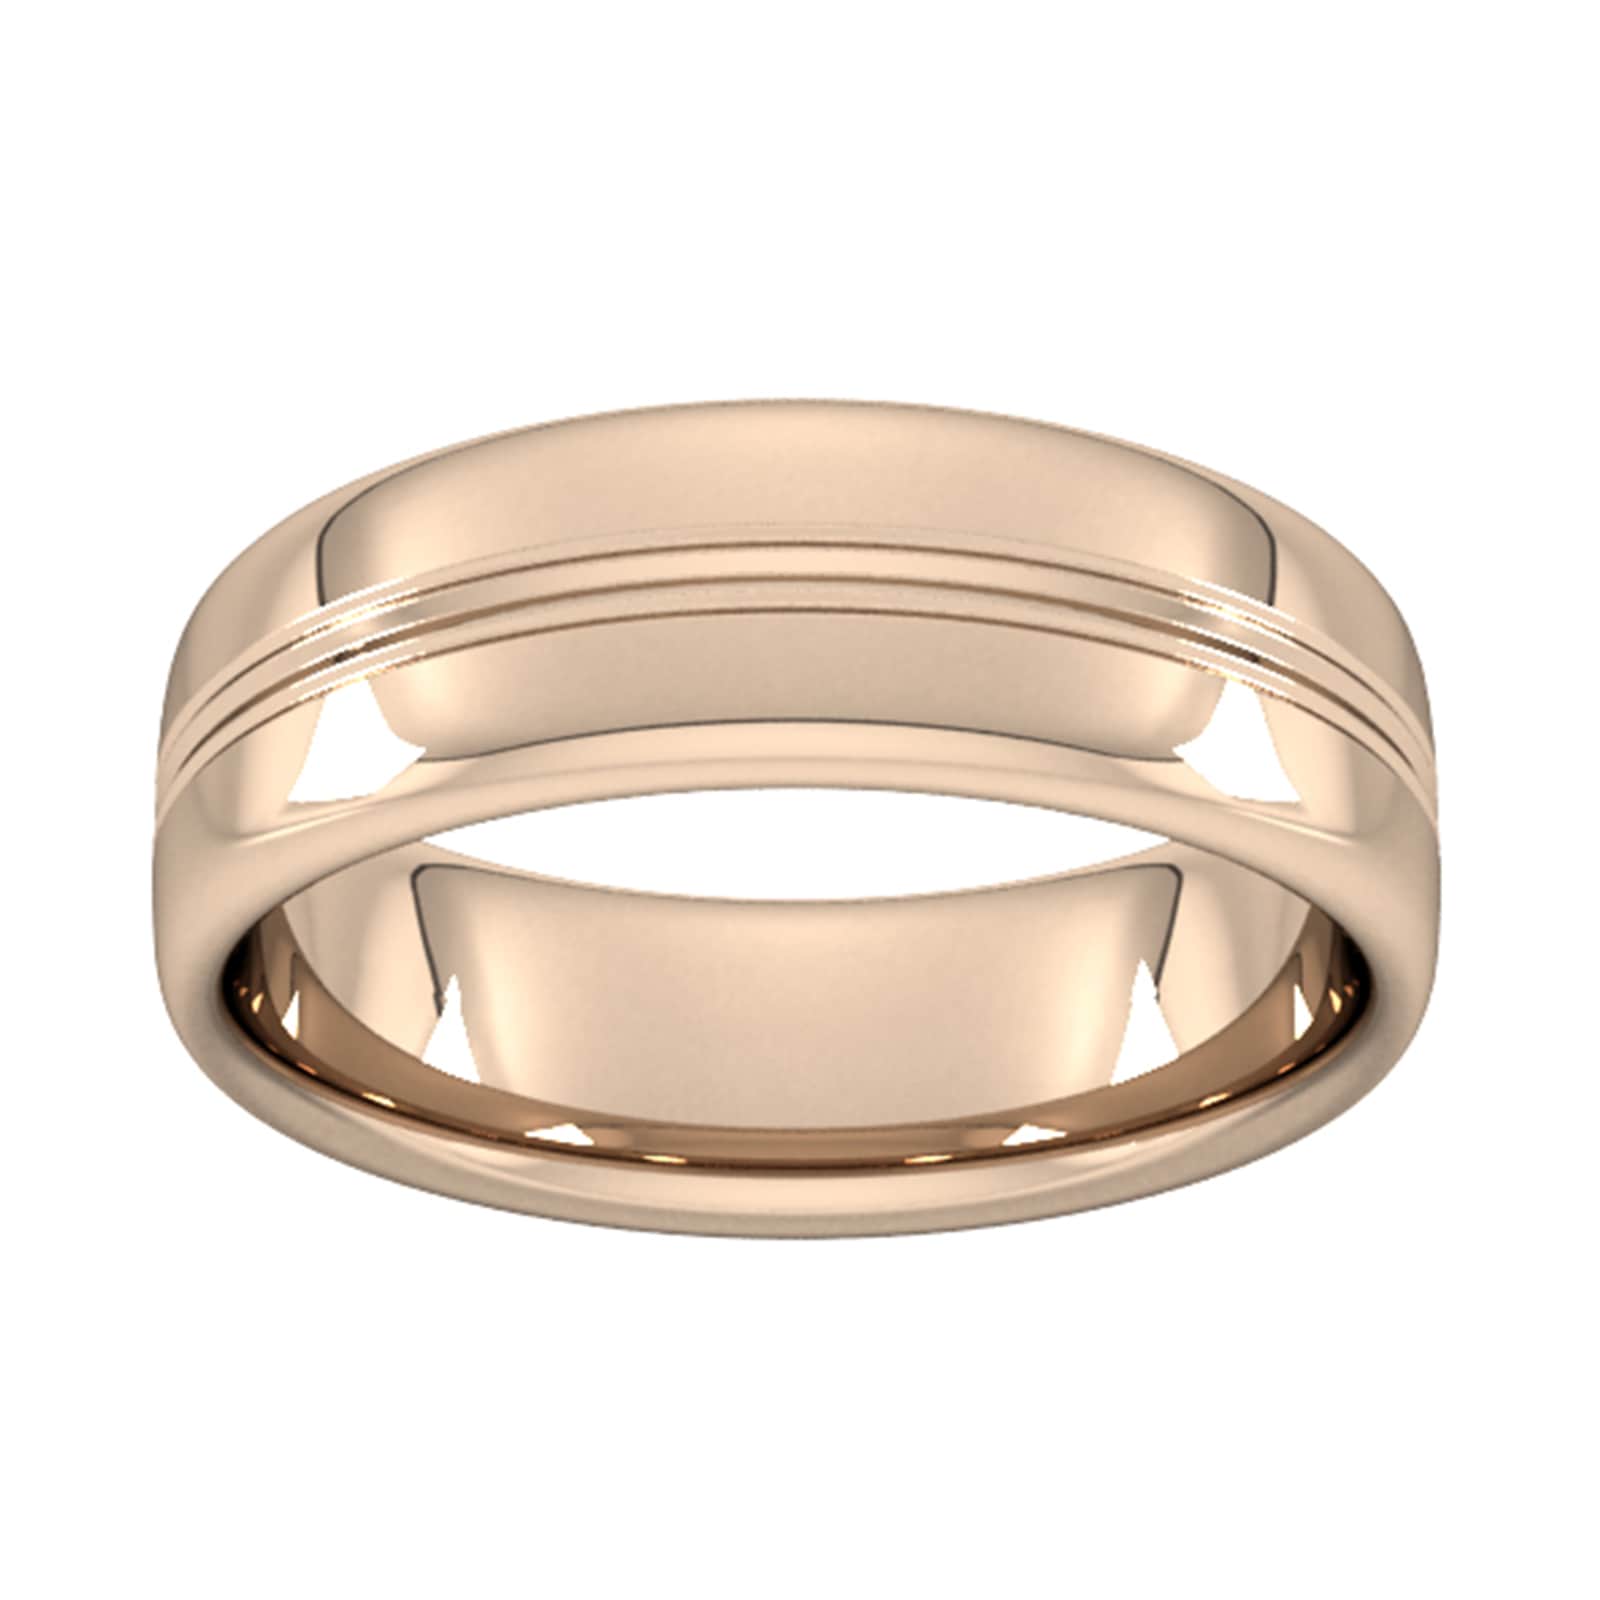 7mm Slight Court Heavy Grooved Polished Finish Wedding Ring In 18 Carat Rose Gold - Ring Size I